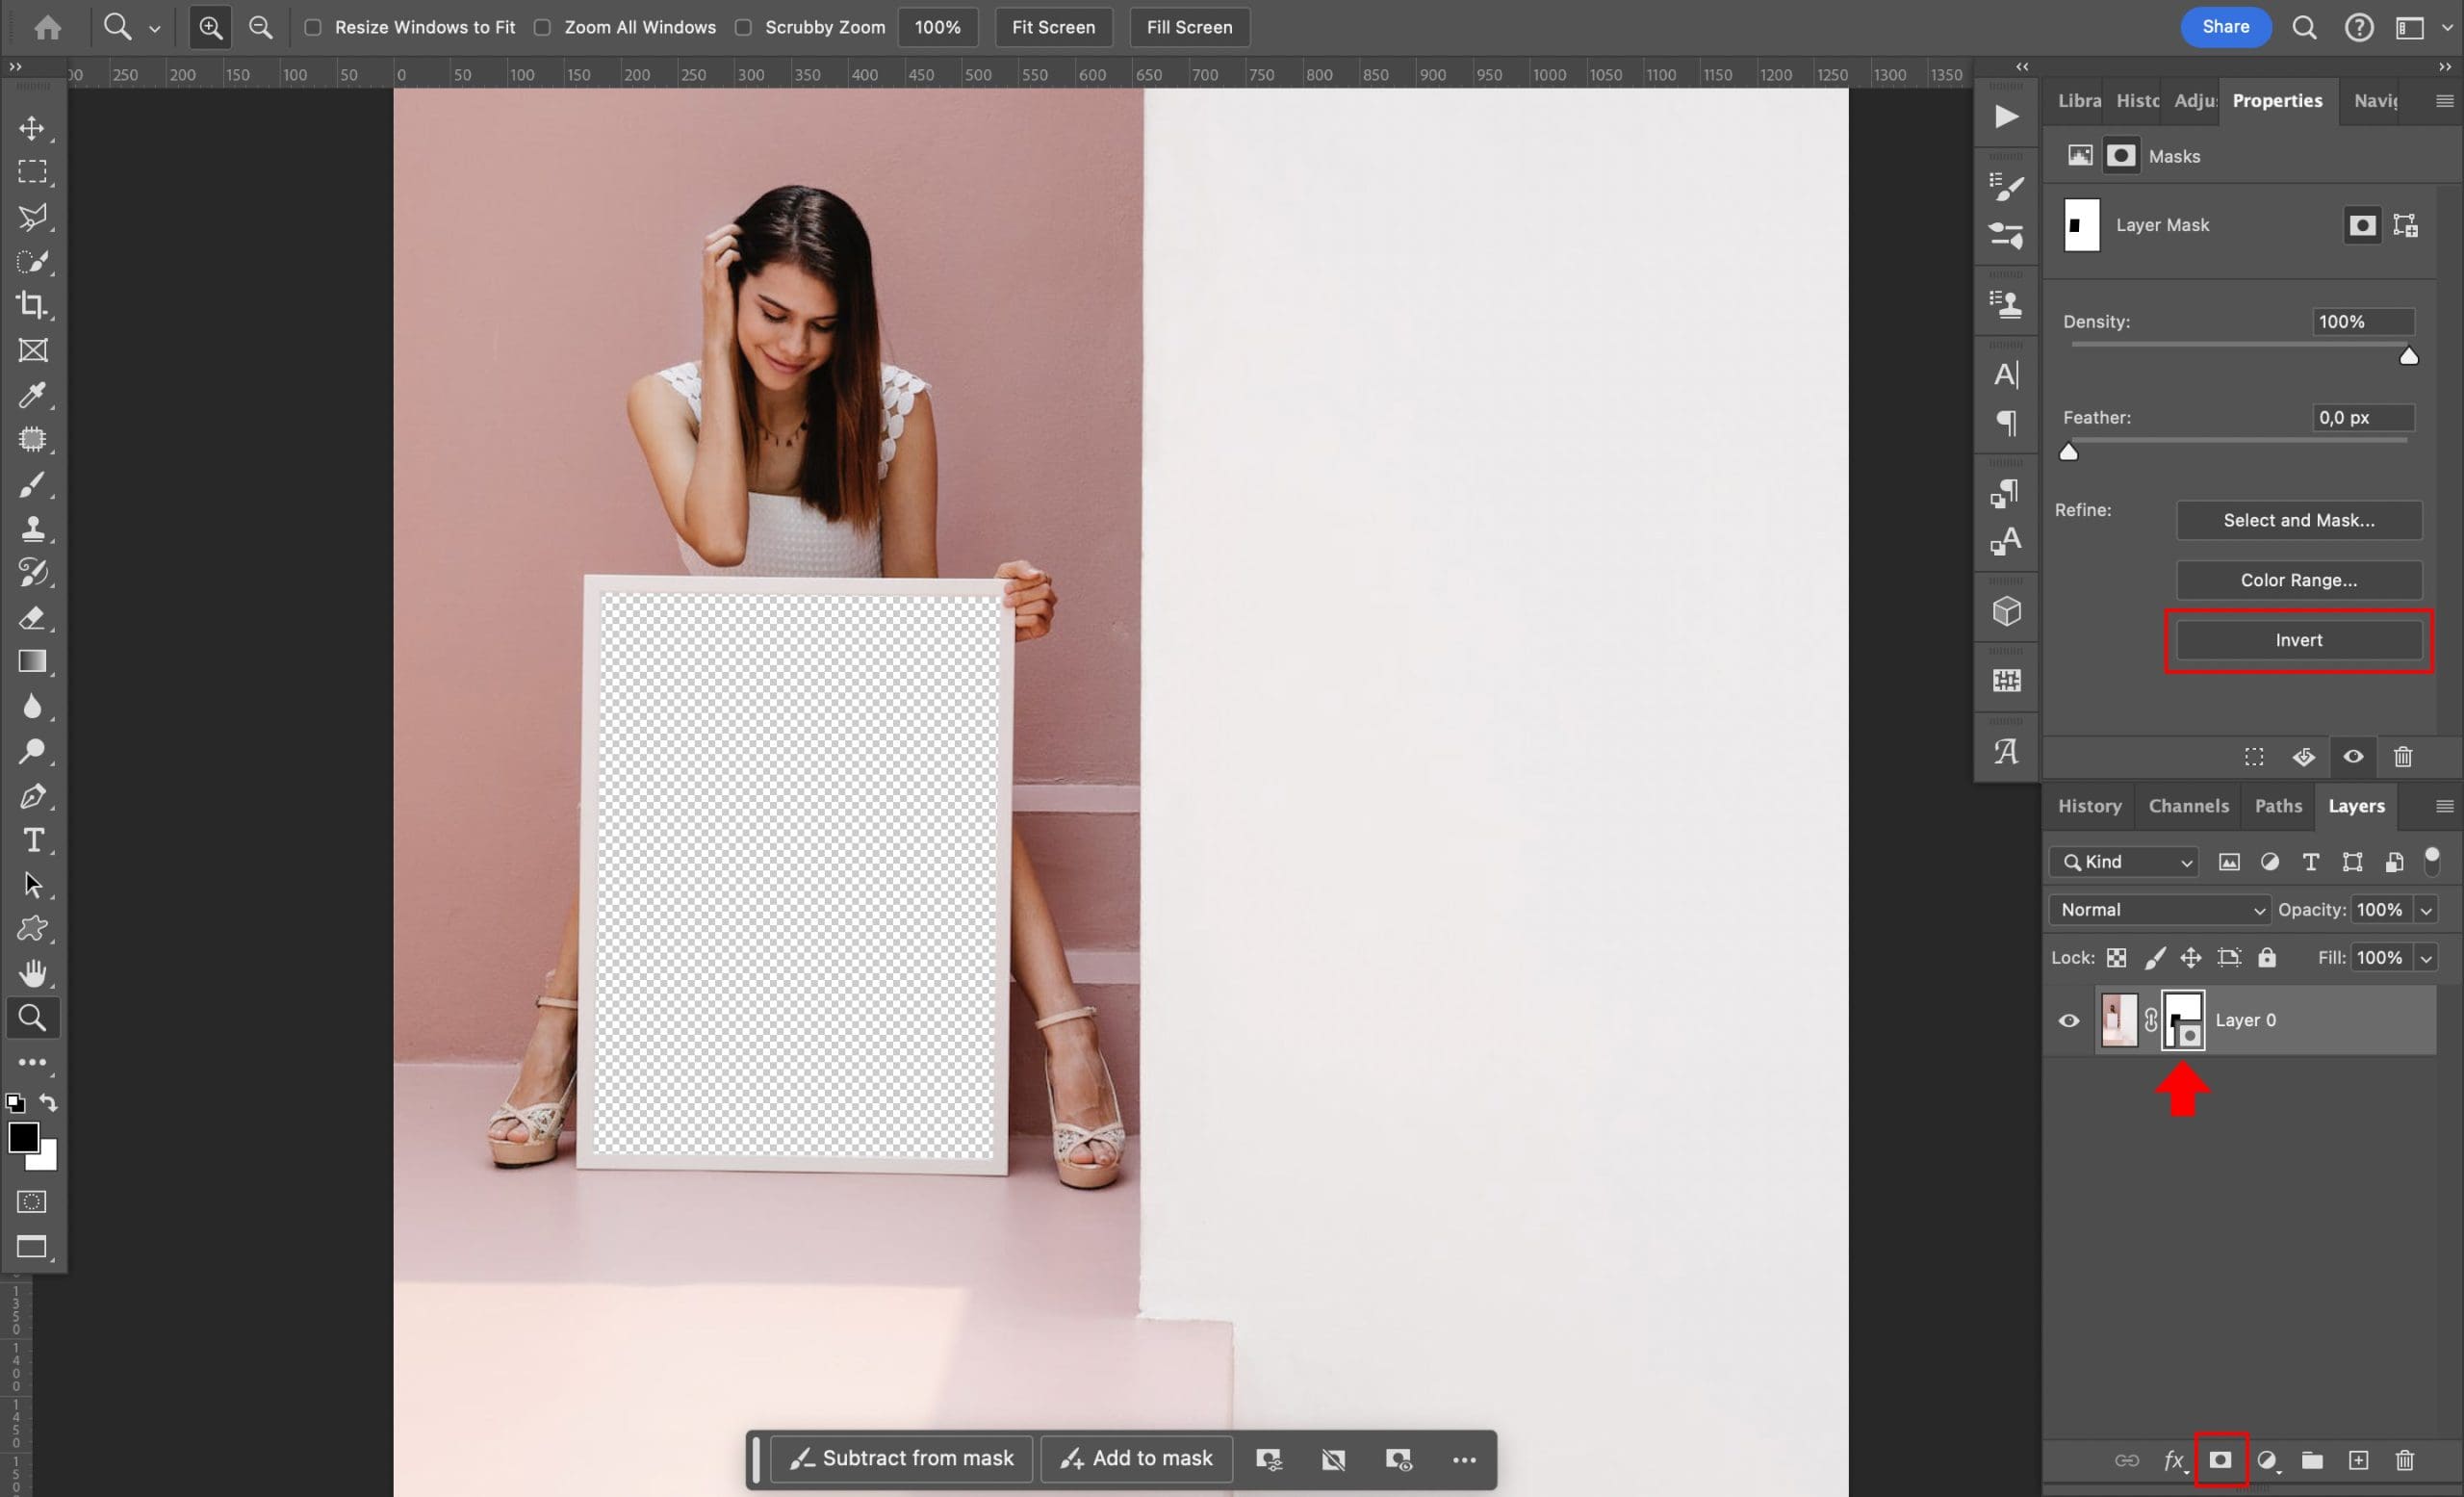 A woman is posing in front of a white board in adobe photoshop.